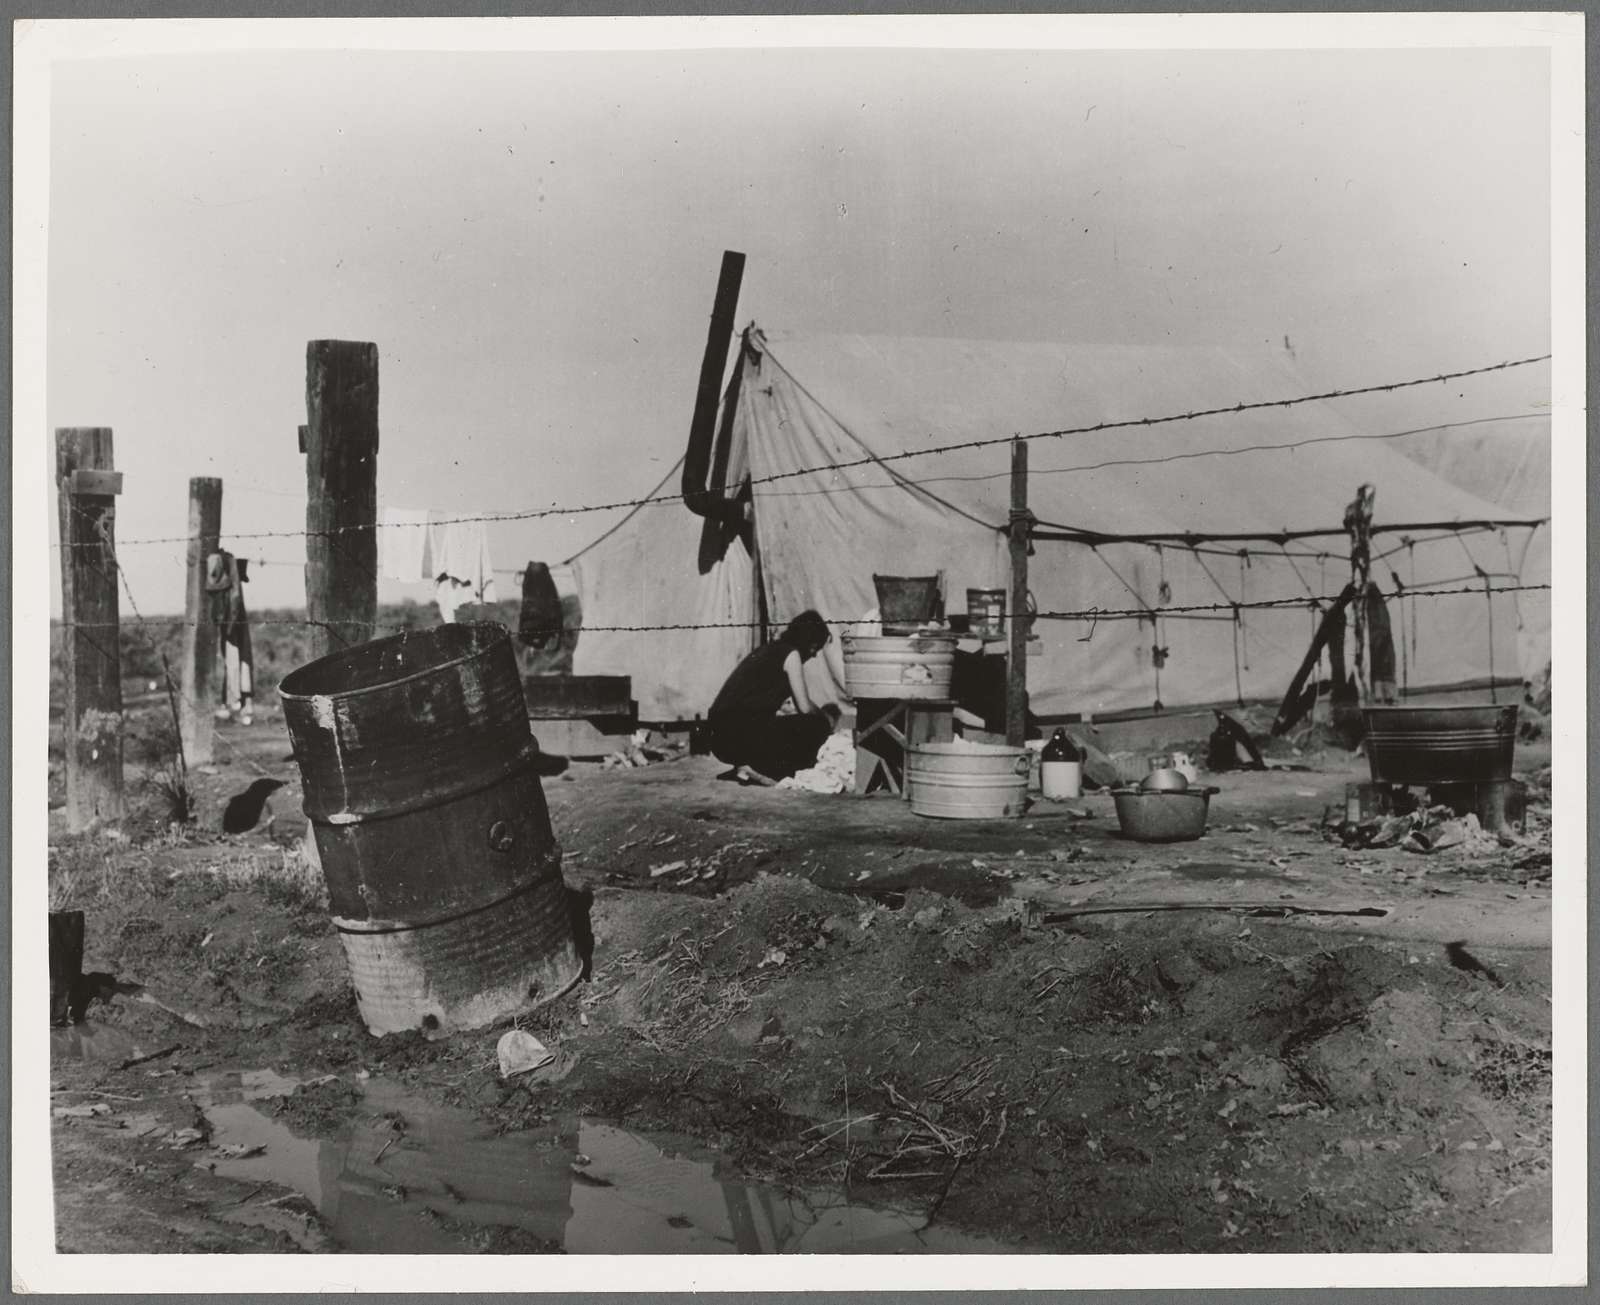 This black and white image shows canvas tent visible through a barbed-wire fence, with a crouched figure washing in the foreground.